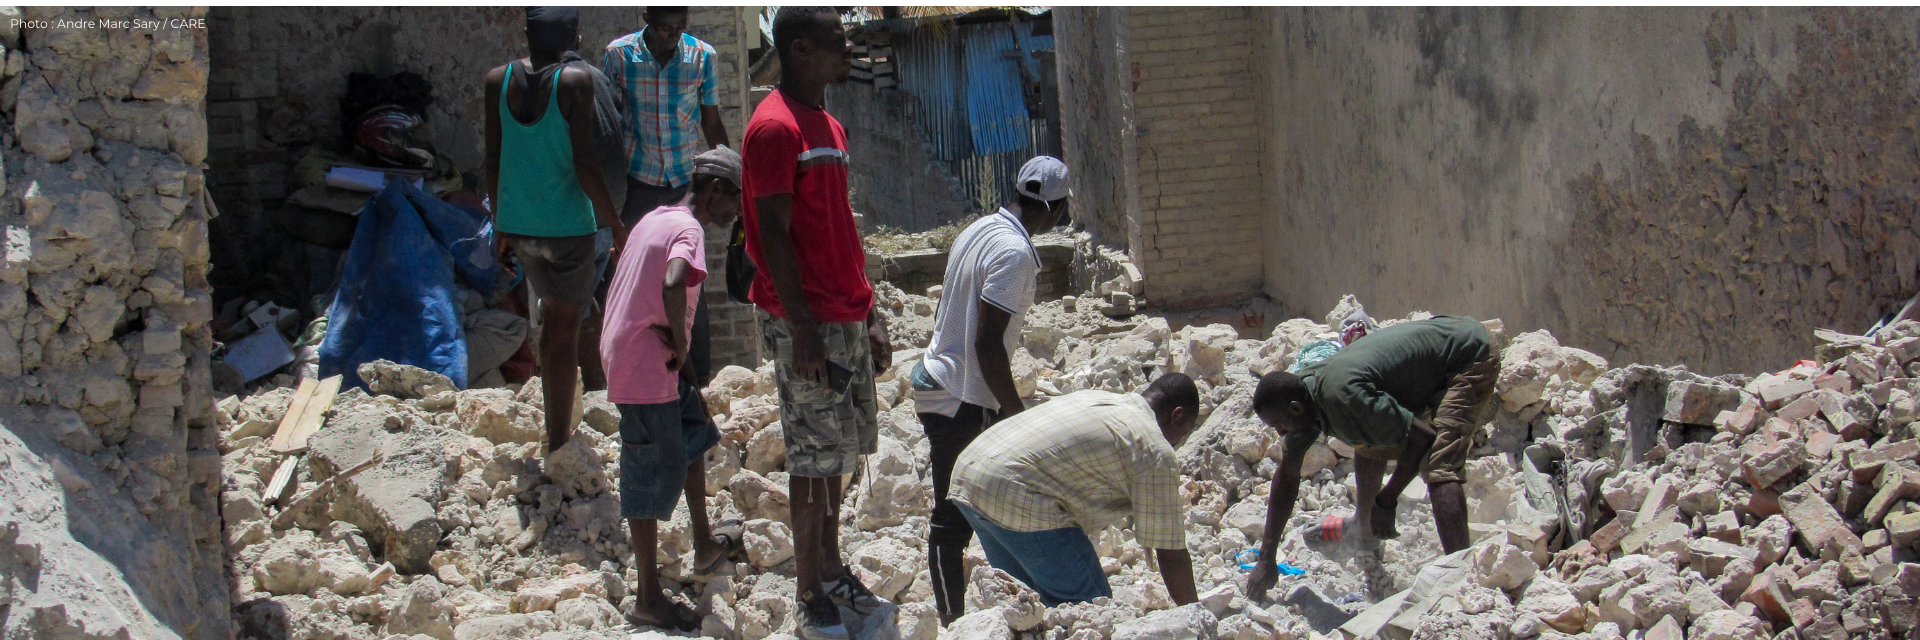 People searching through the rubble after the earthquake in Haiti